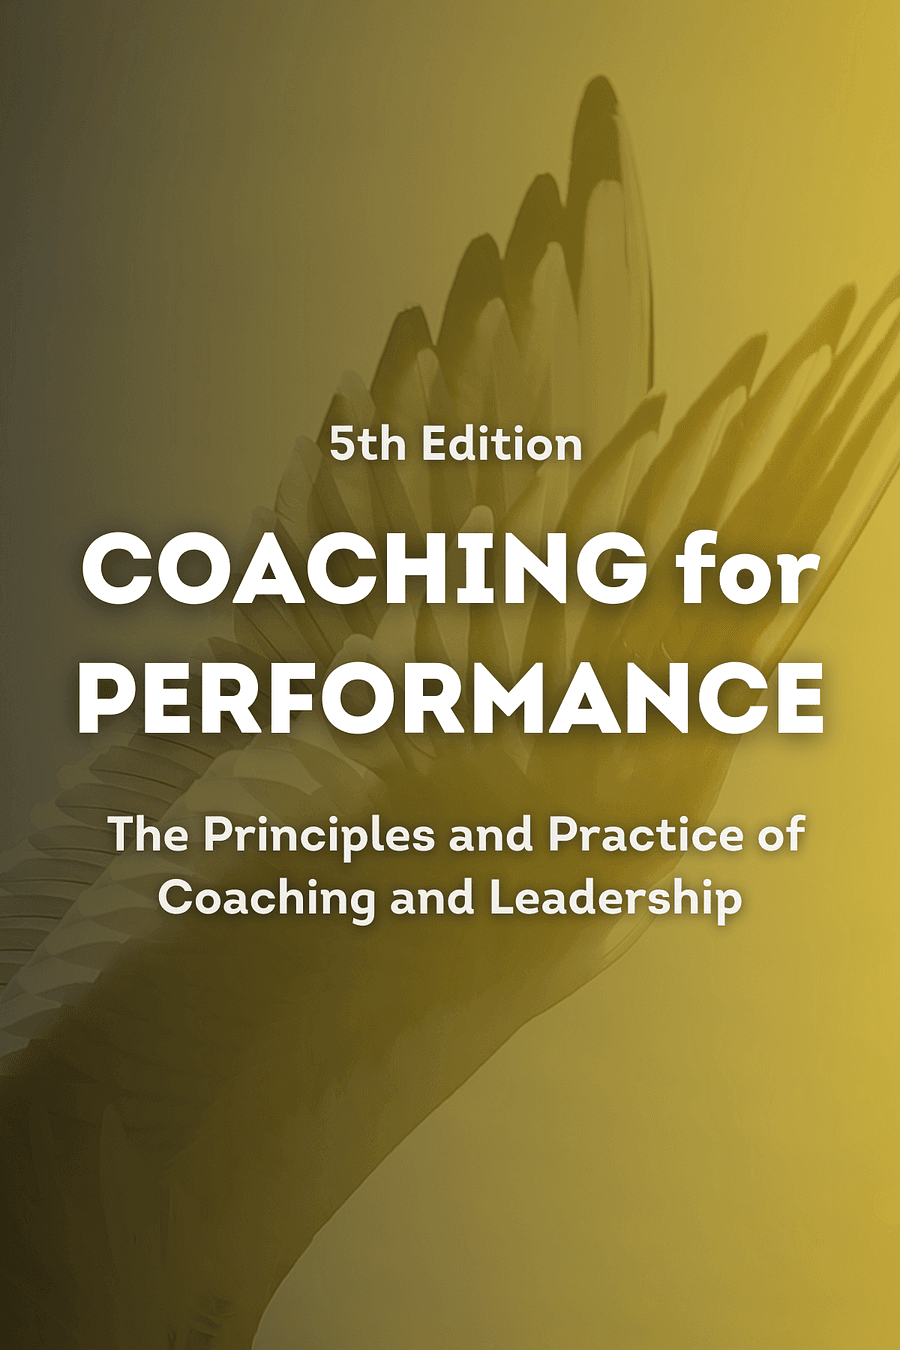 Coaching for Performance Fifth Edition by Sir John Whitmore - Book Summary